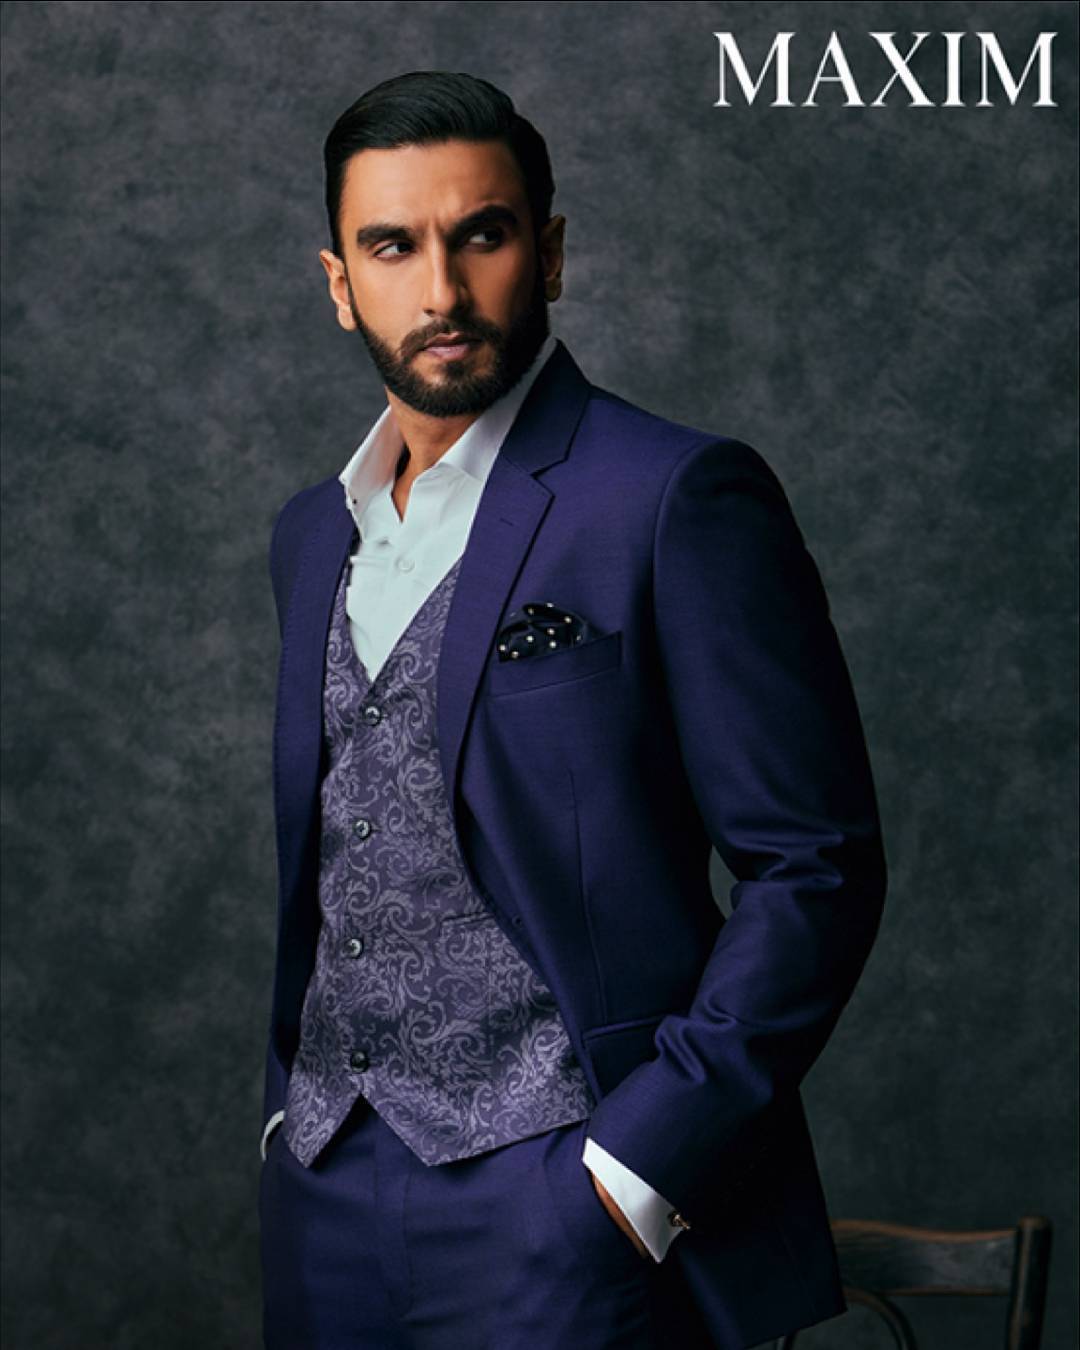 Crisp, dapper and tailored to perfection. Here’s @RanveerSingh wearing the 3-piece Royal Blue suit from our latest AW’17 collection for Maxim.

#TheArvindStores #Maxim #RanveerSingh #RanveerForMaxim #Style #StyleStatement #mensfashion #MensStyle #MensFashion